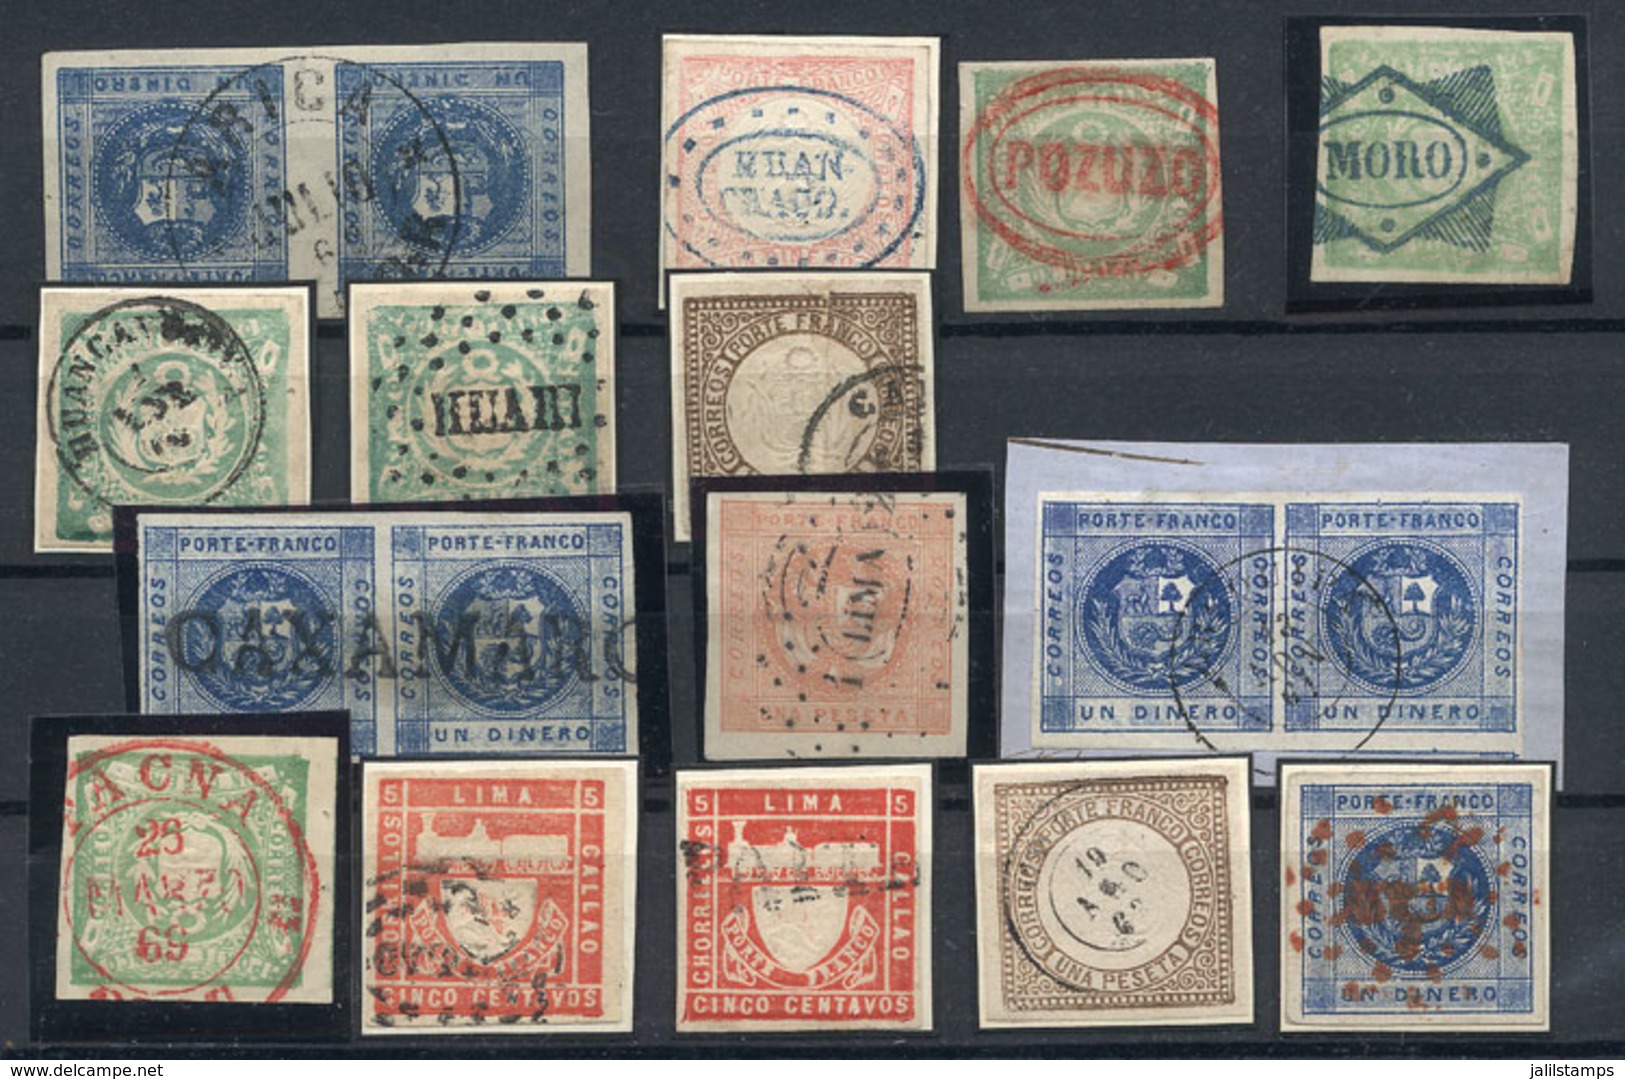 PERU: RARE CANCELS: Stockcard With 3 Pairs And 12 Classic Stamps, All With Rare And Scarce Cancels, For Example Of Arica - Perú